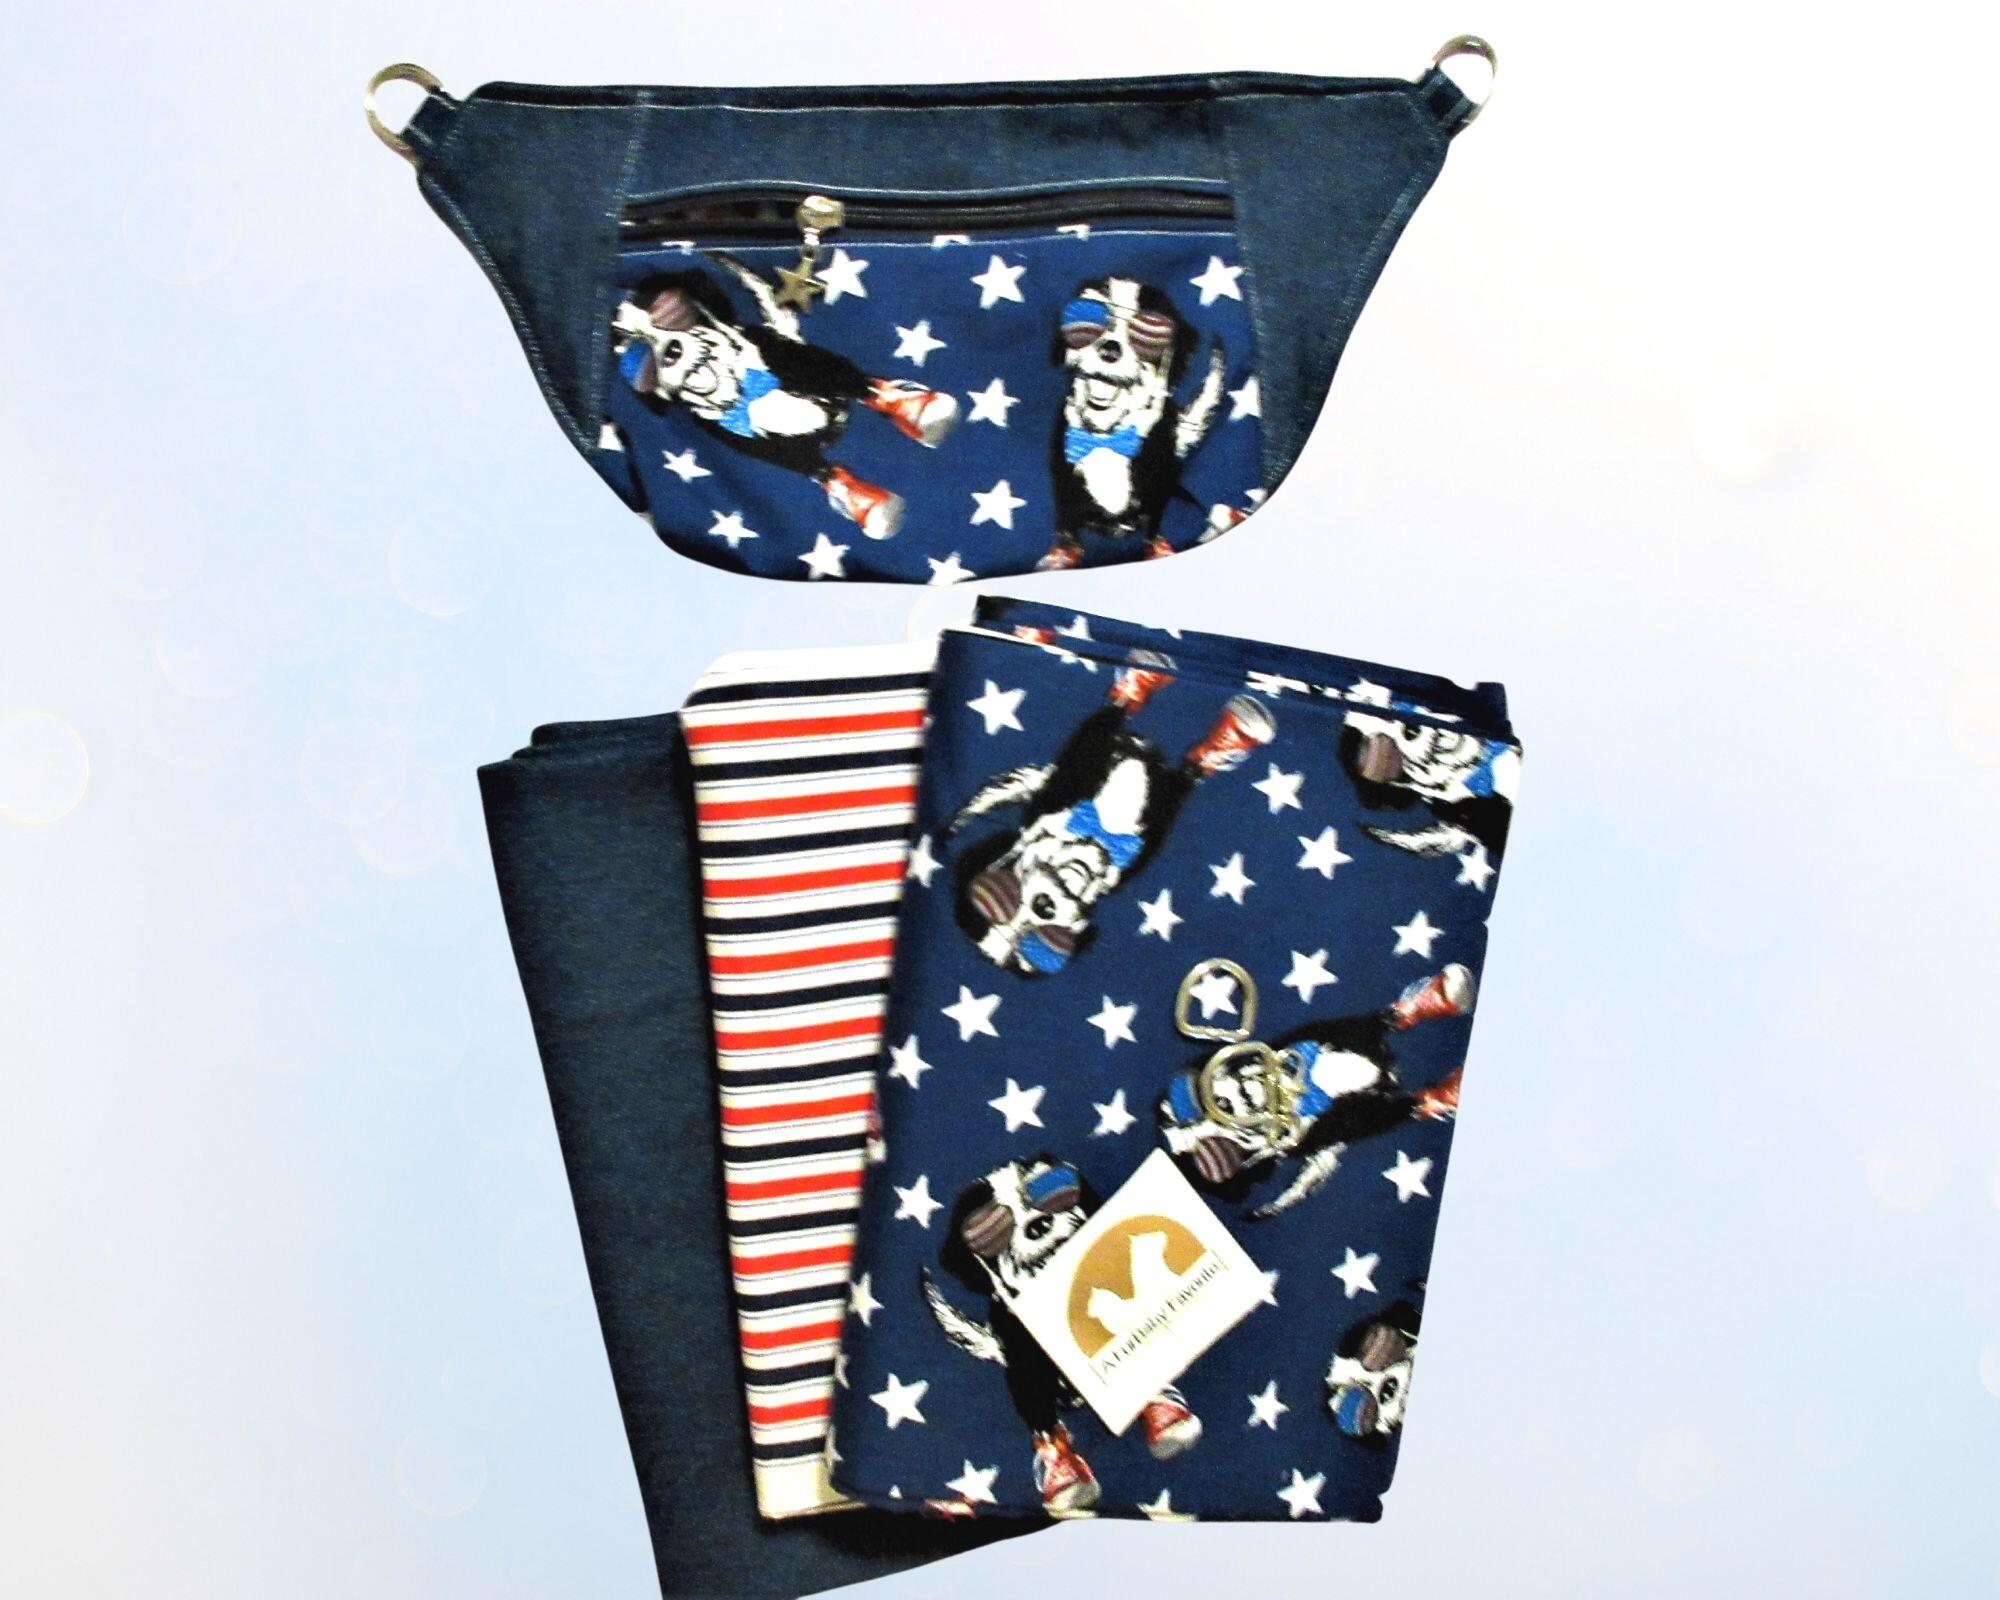 Fabric we used for the hipster americana Rock Star Dog Fanny Pack for men or women Adjustable strap with Red white and blue lining bum bag